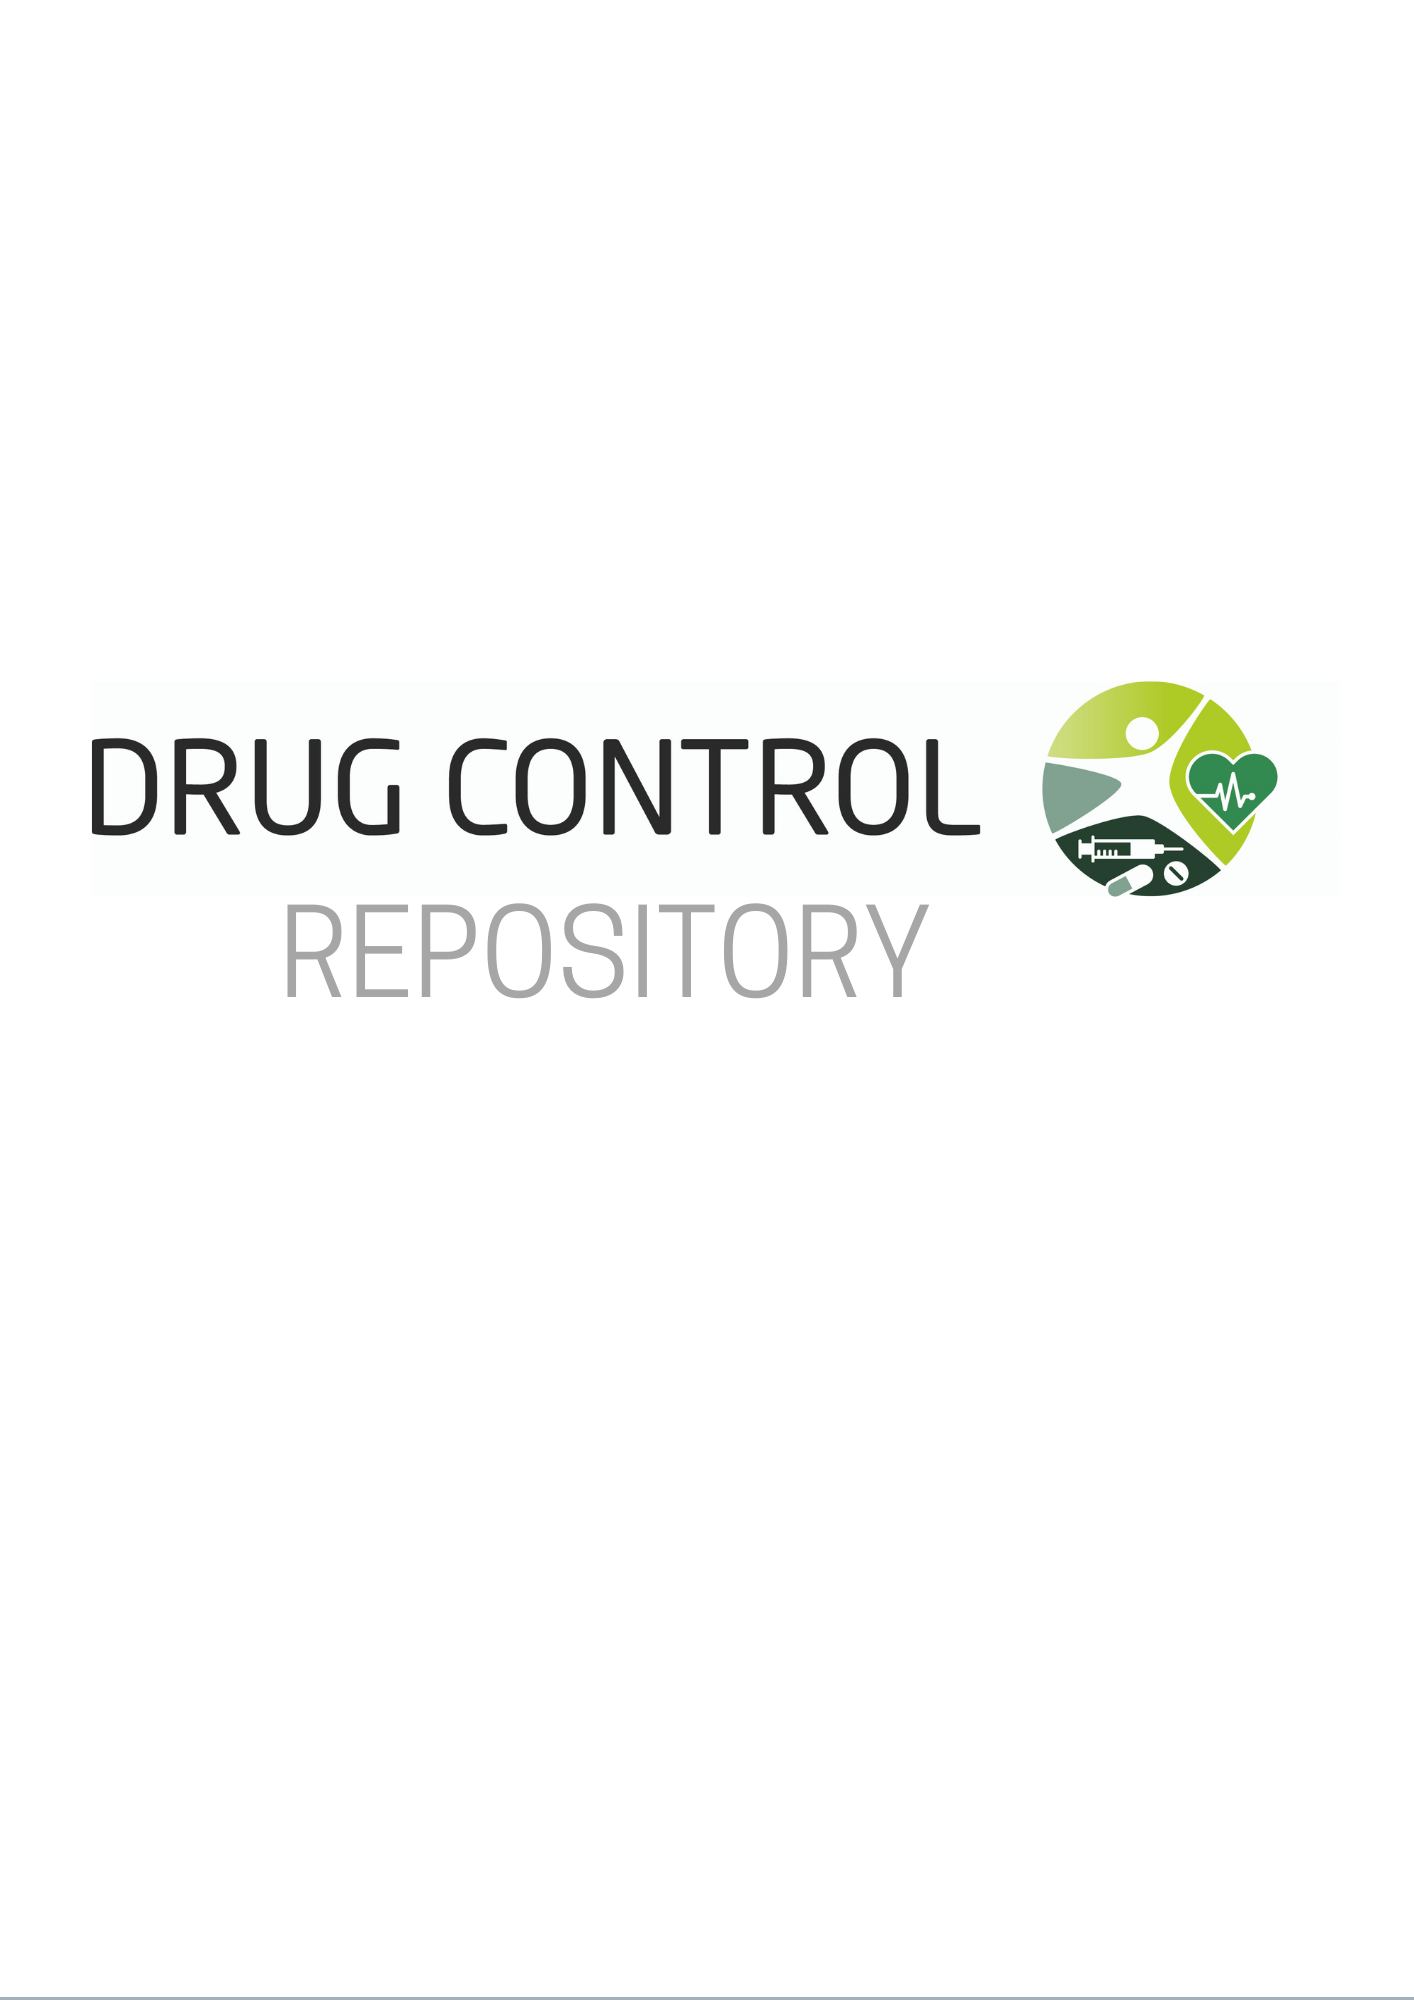 <p style="text-align: center;"><a href="https://sherloc.unodc.org/cld/v3/drugcontrolrepository/#:~:text=The%20Drug%20Control%20Repository%20is,Protocol%2C%20the%20Convention%20on%20Psychotropic">UNODC Drug Control Repository</a></p>